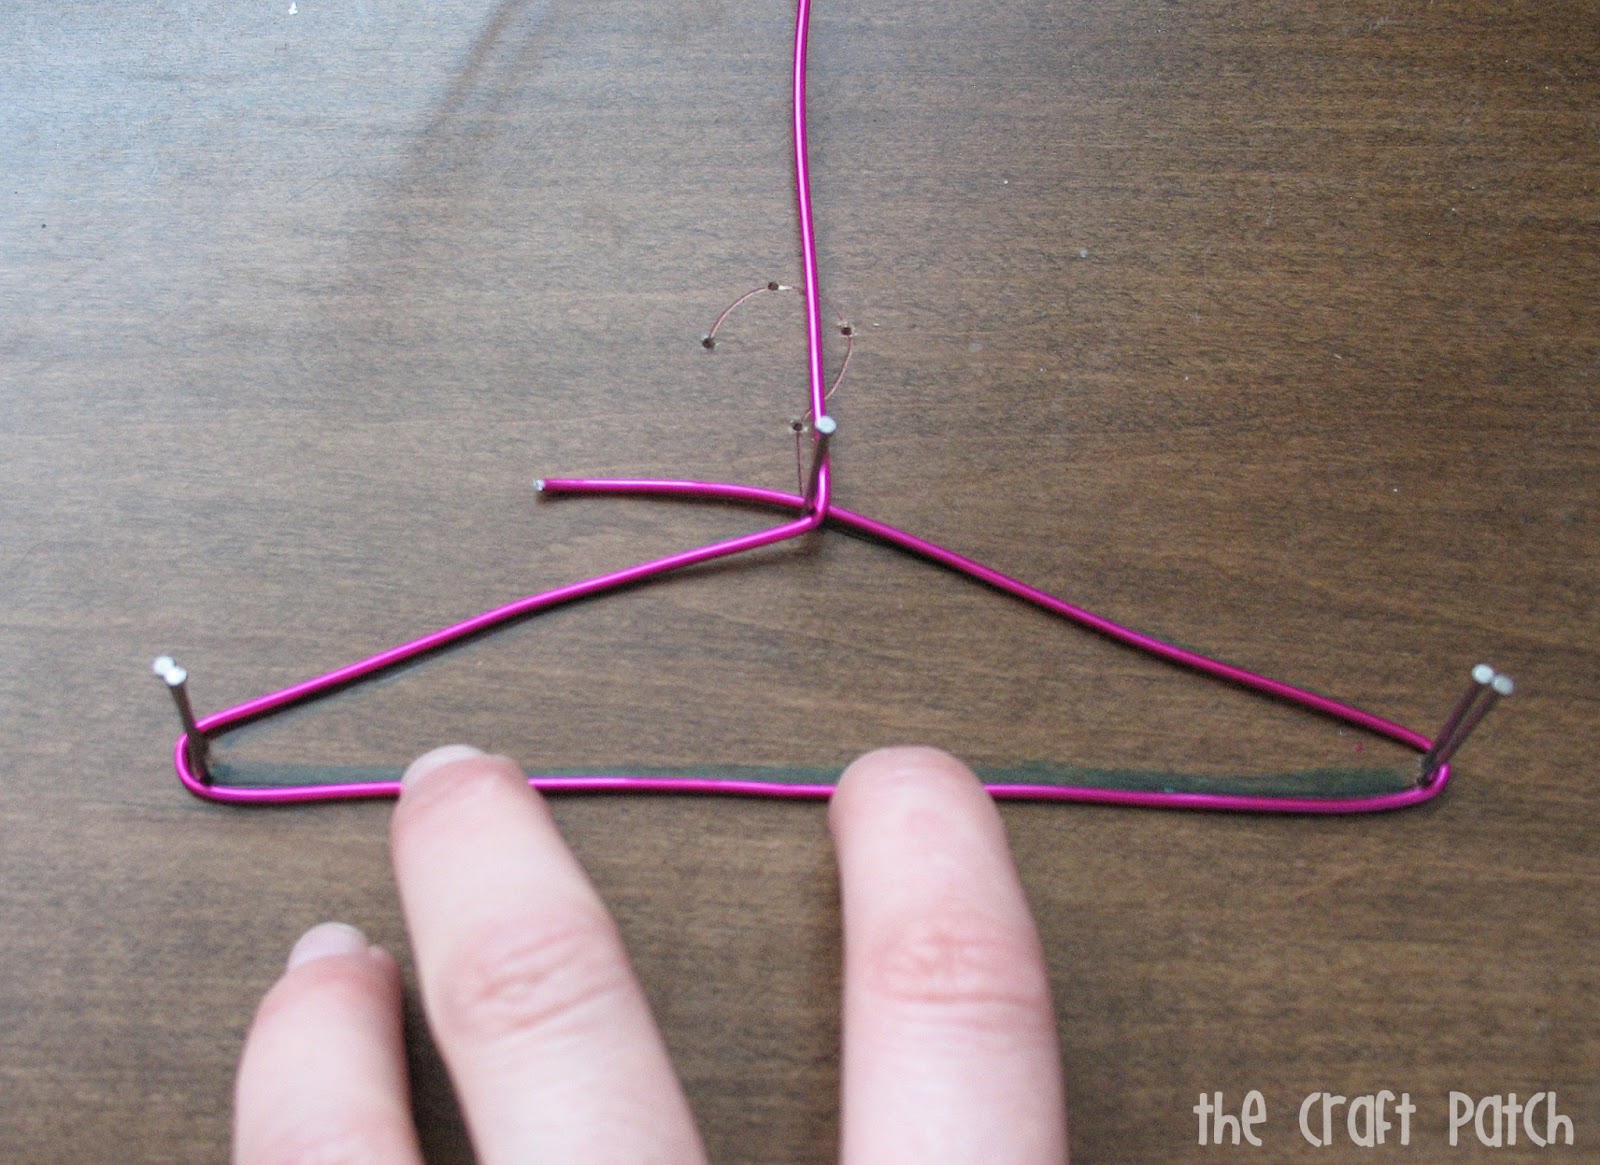 doll clothes hanger